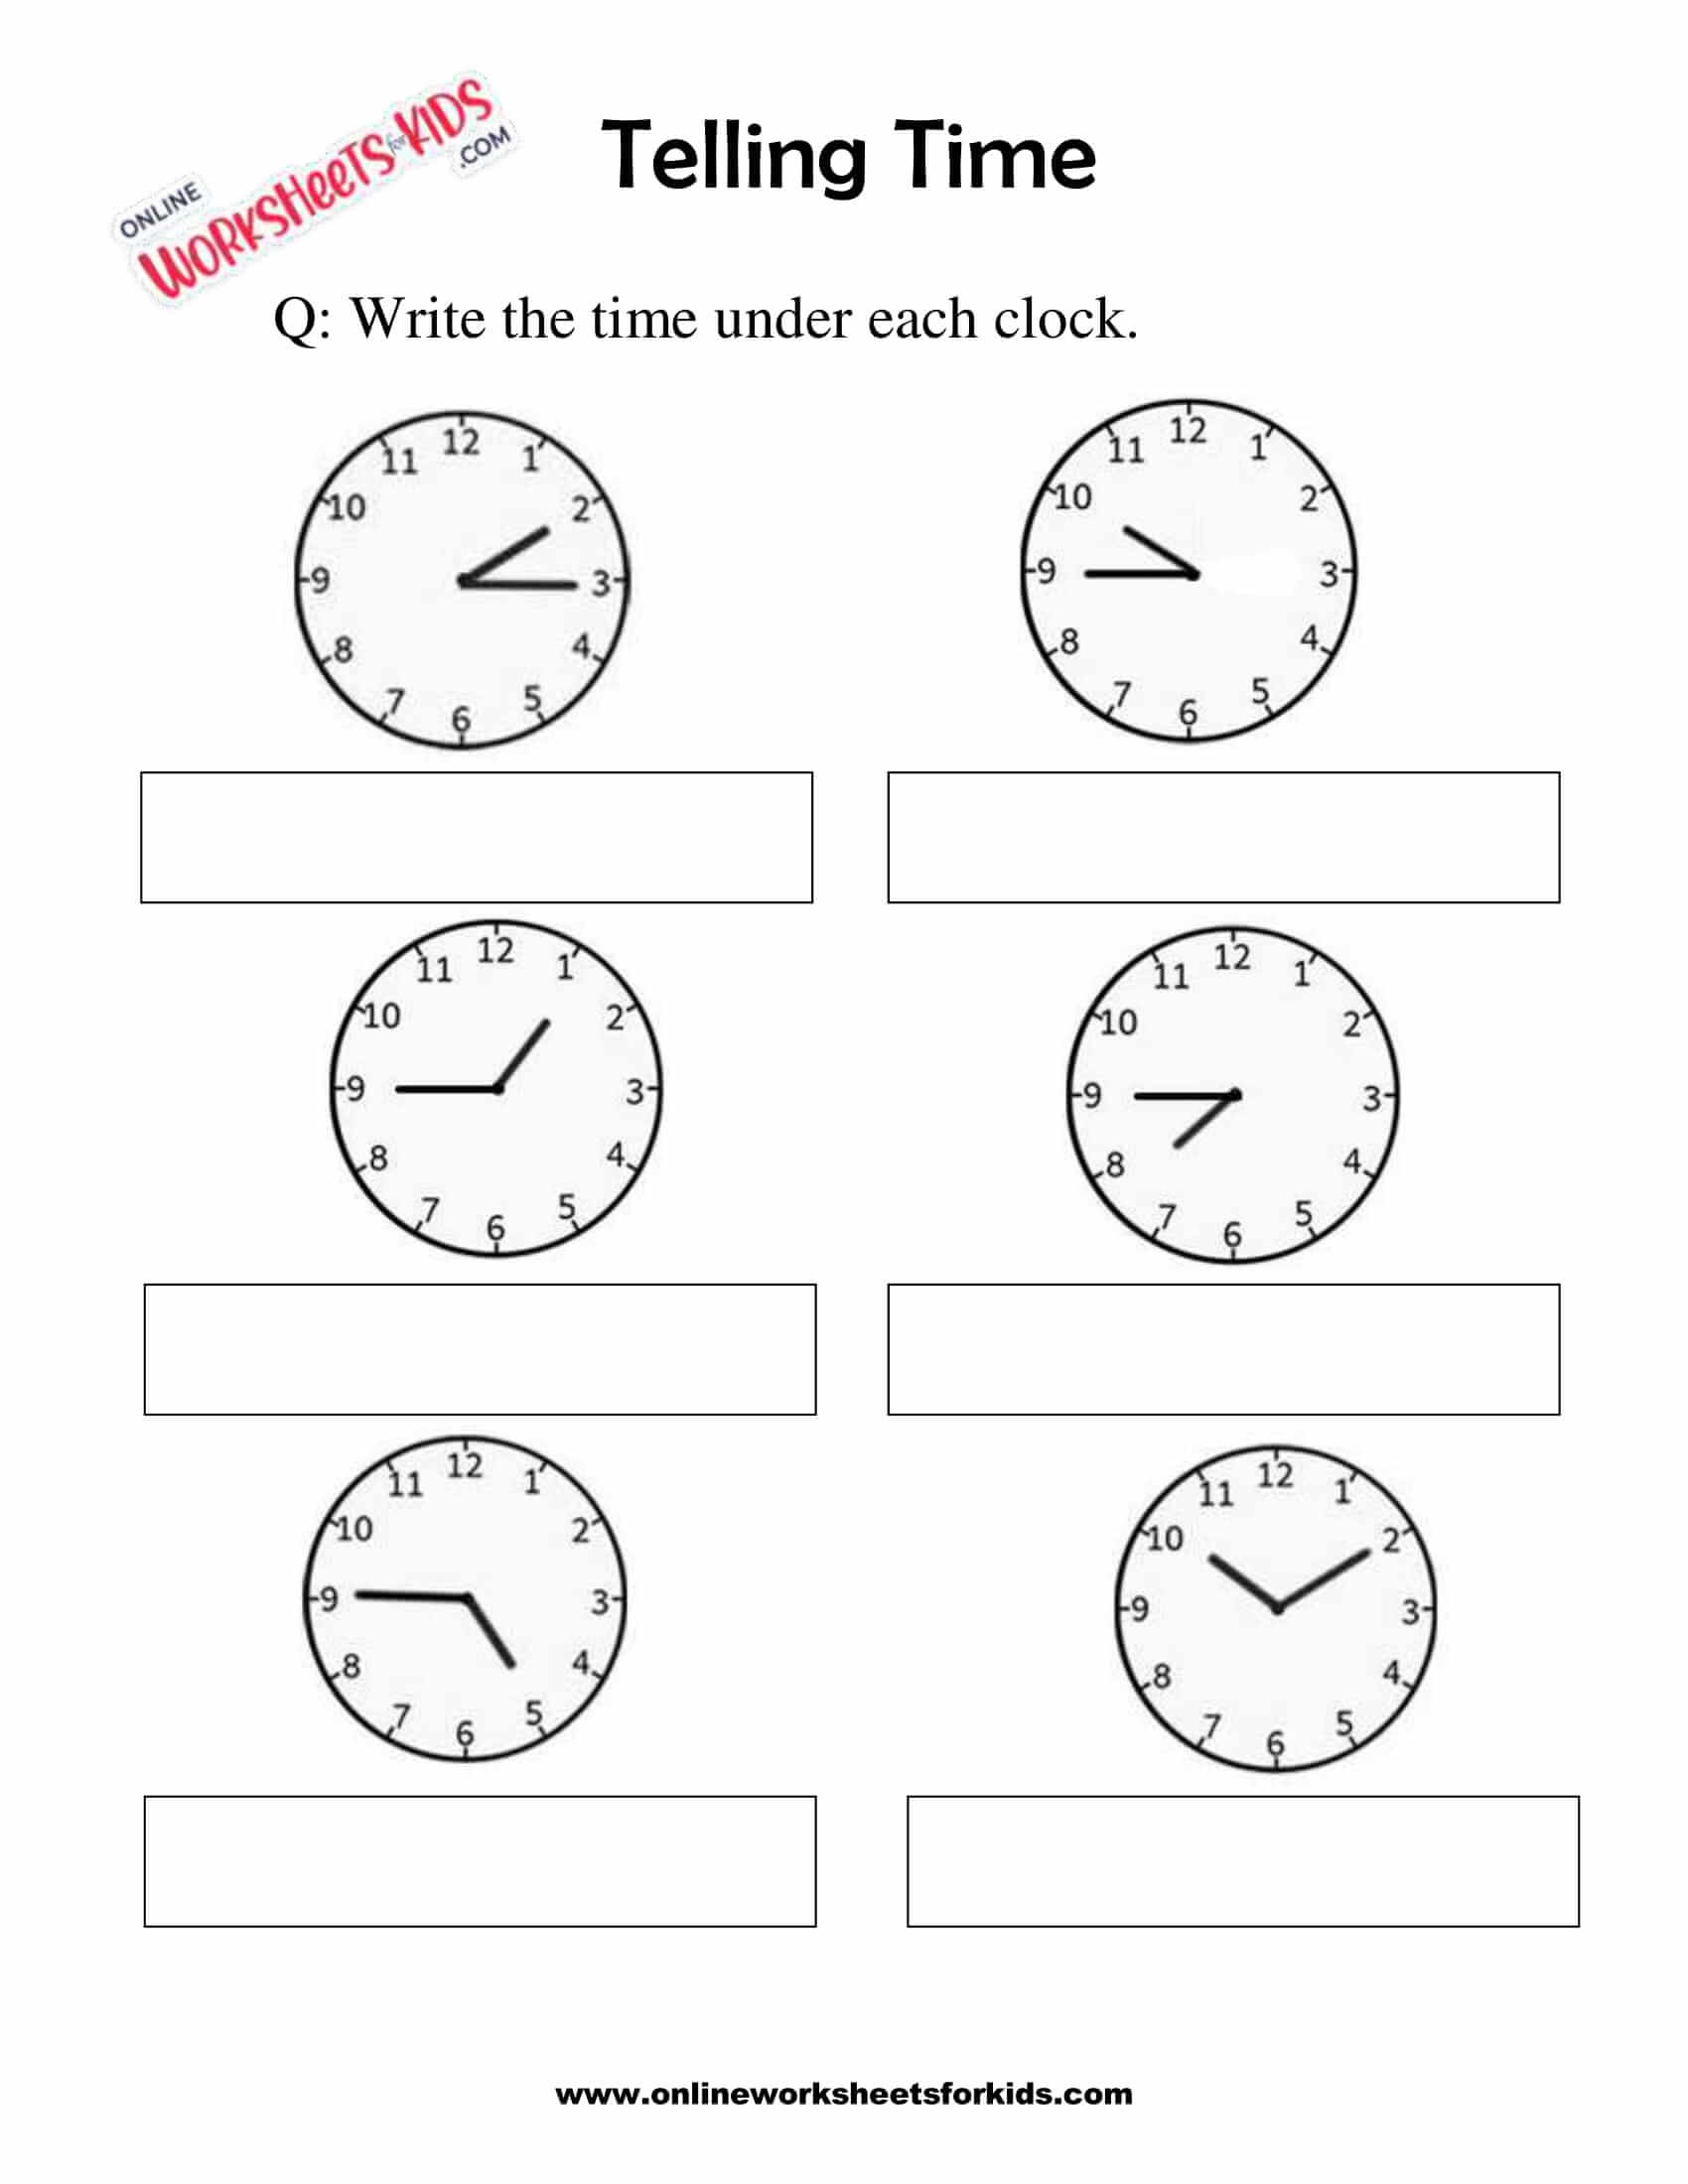 1st-grade-telling-time-worksheets-free-printable-k5-learning-telling-time-worksheets-for-1st